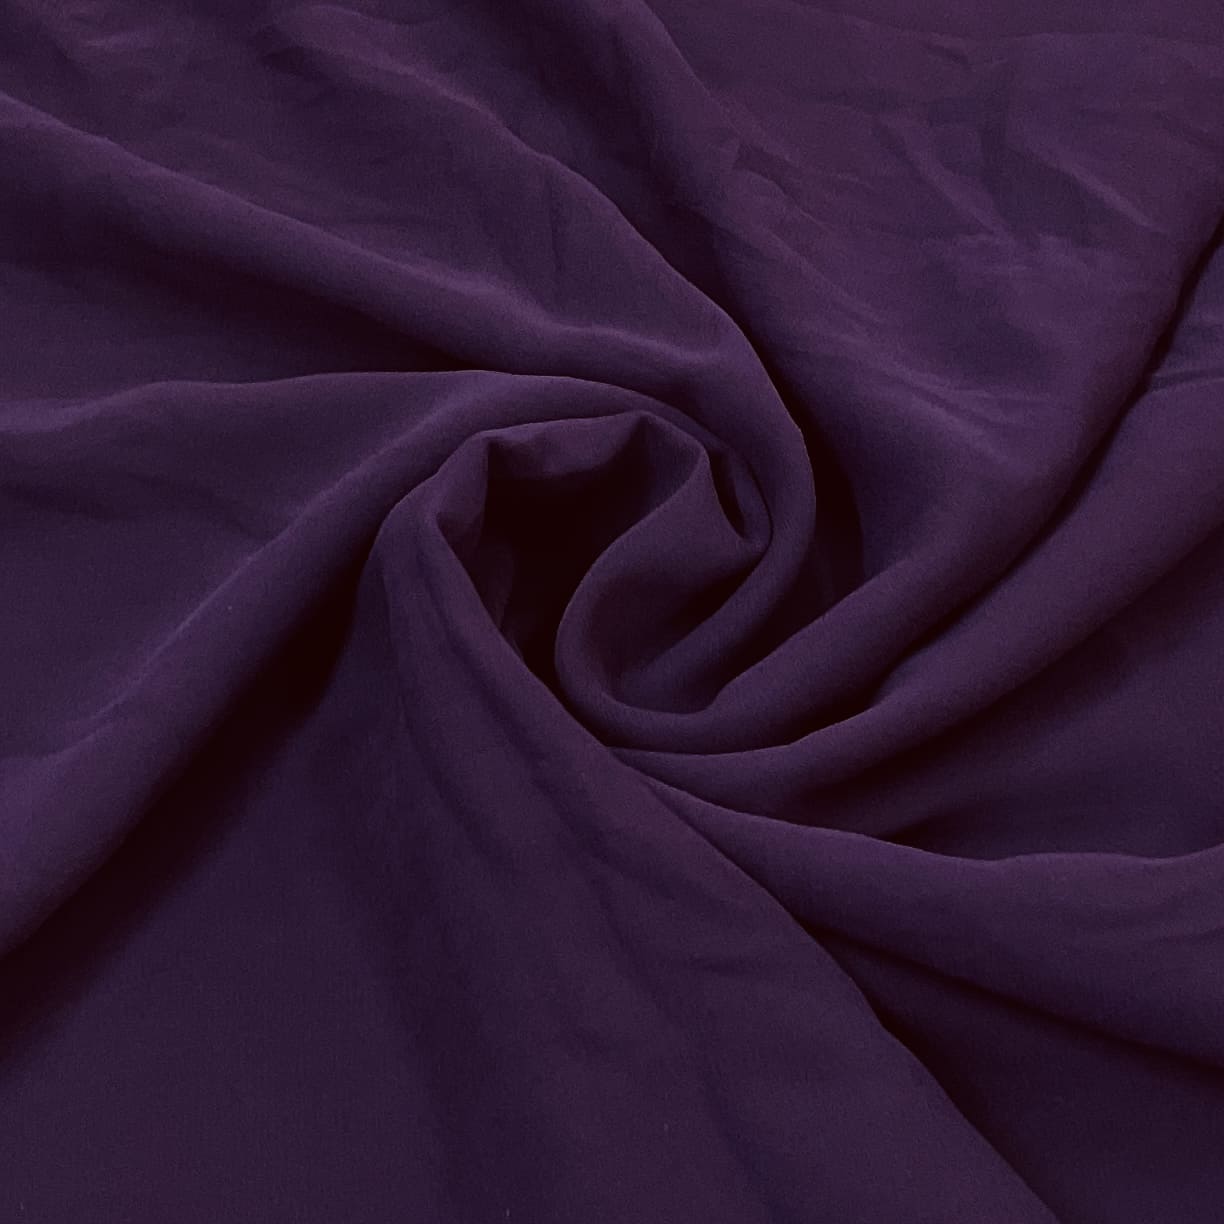 58-60 Purple Plain Georgette Fabric, For Garments at Rs 65/meter